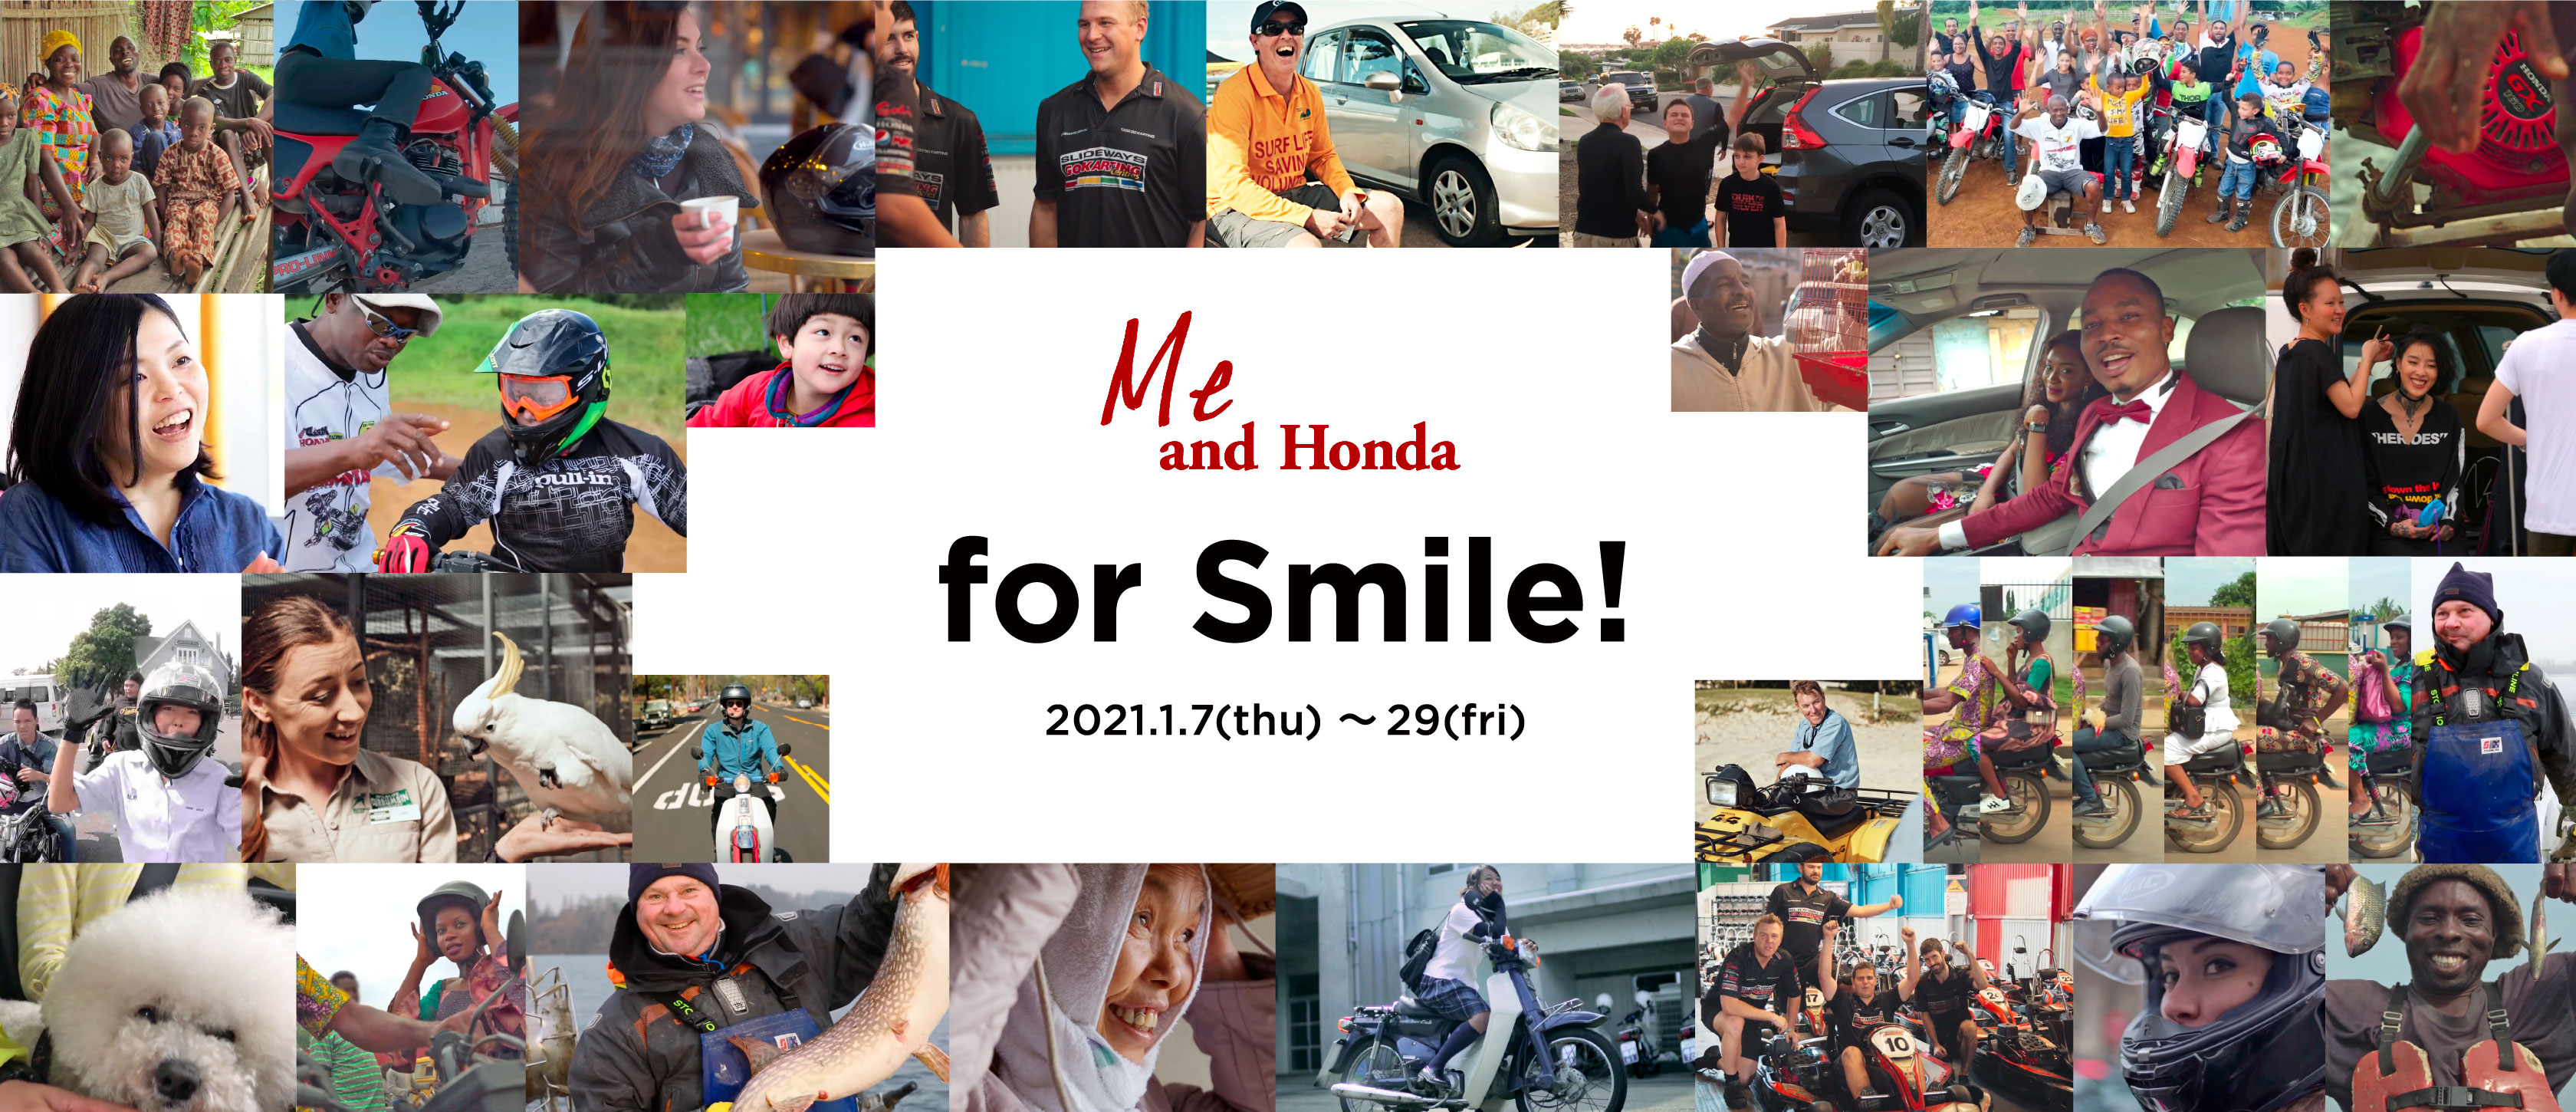 Me and Honda for Smile!